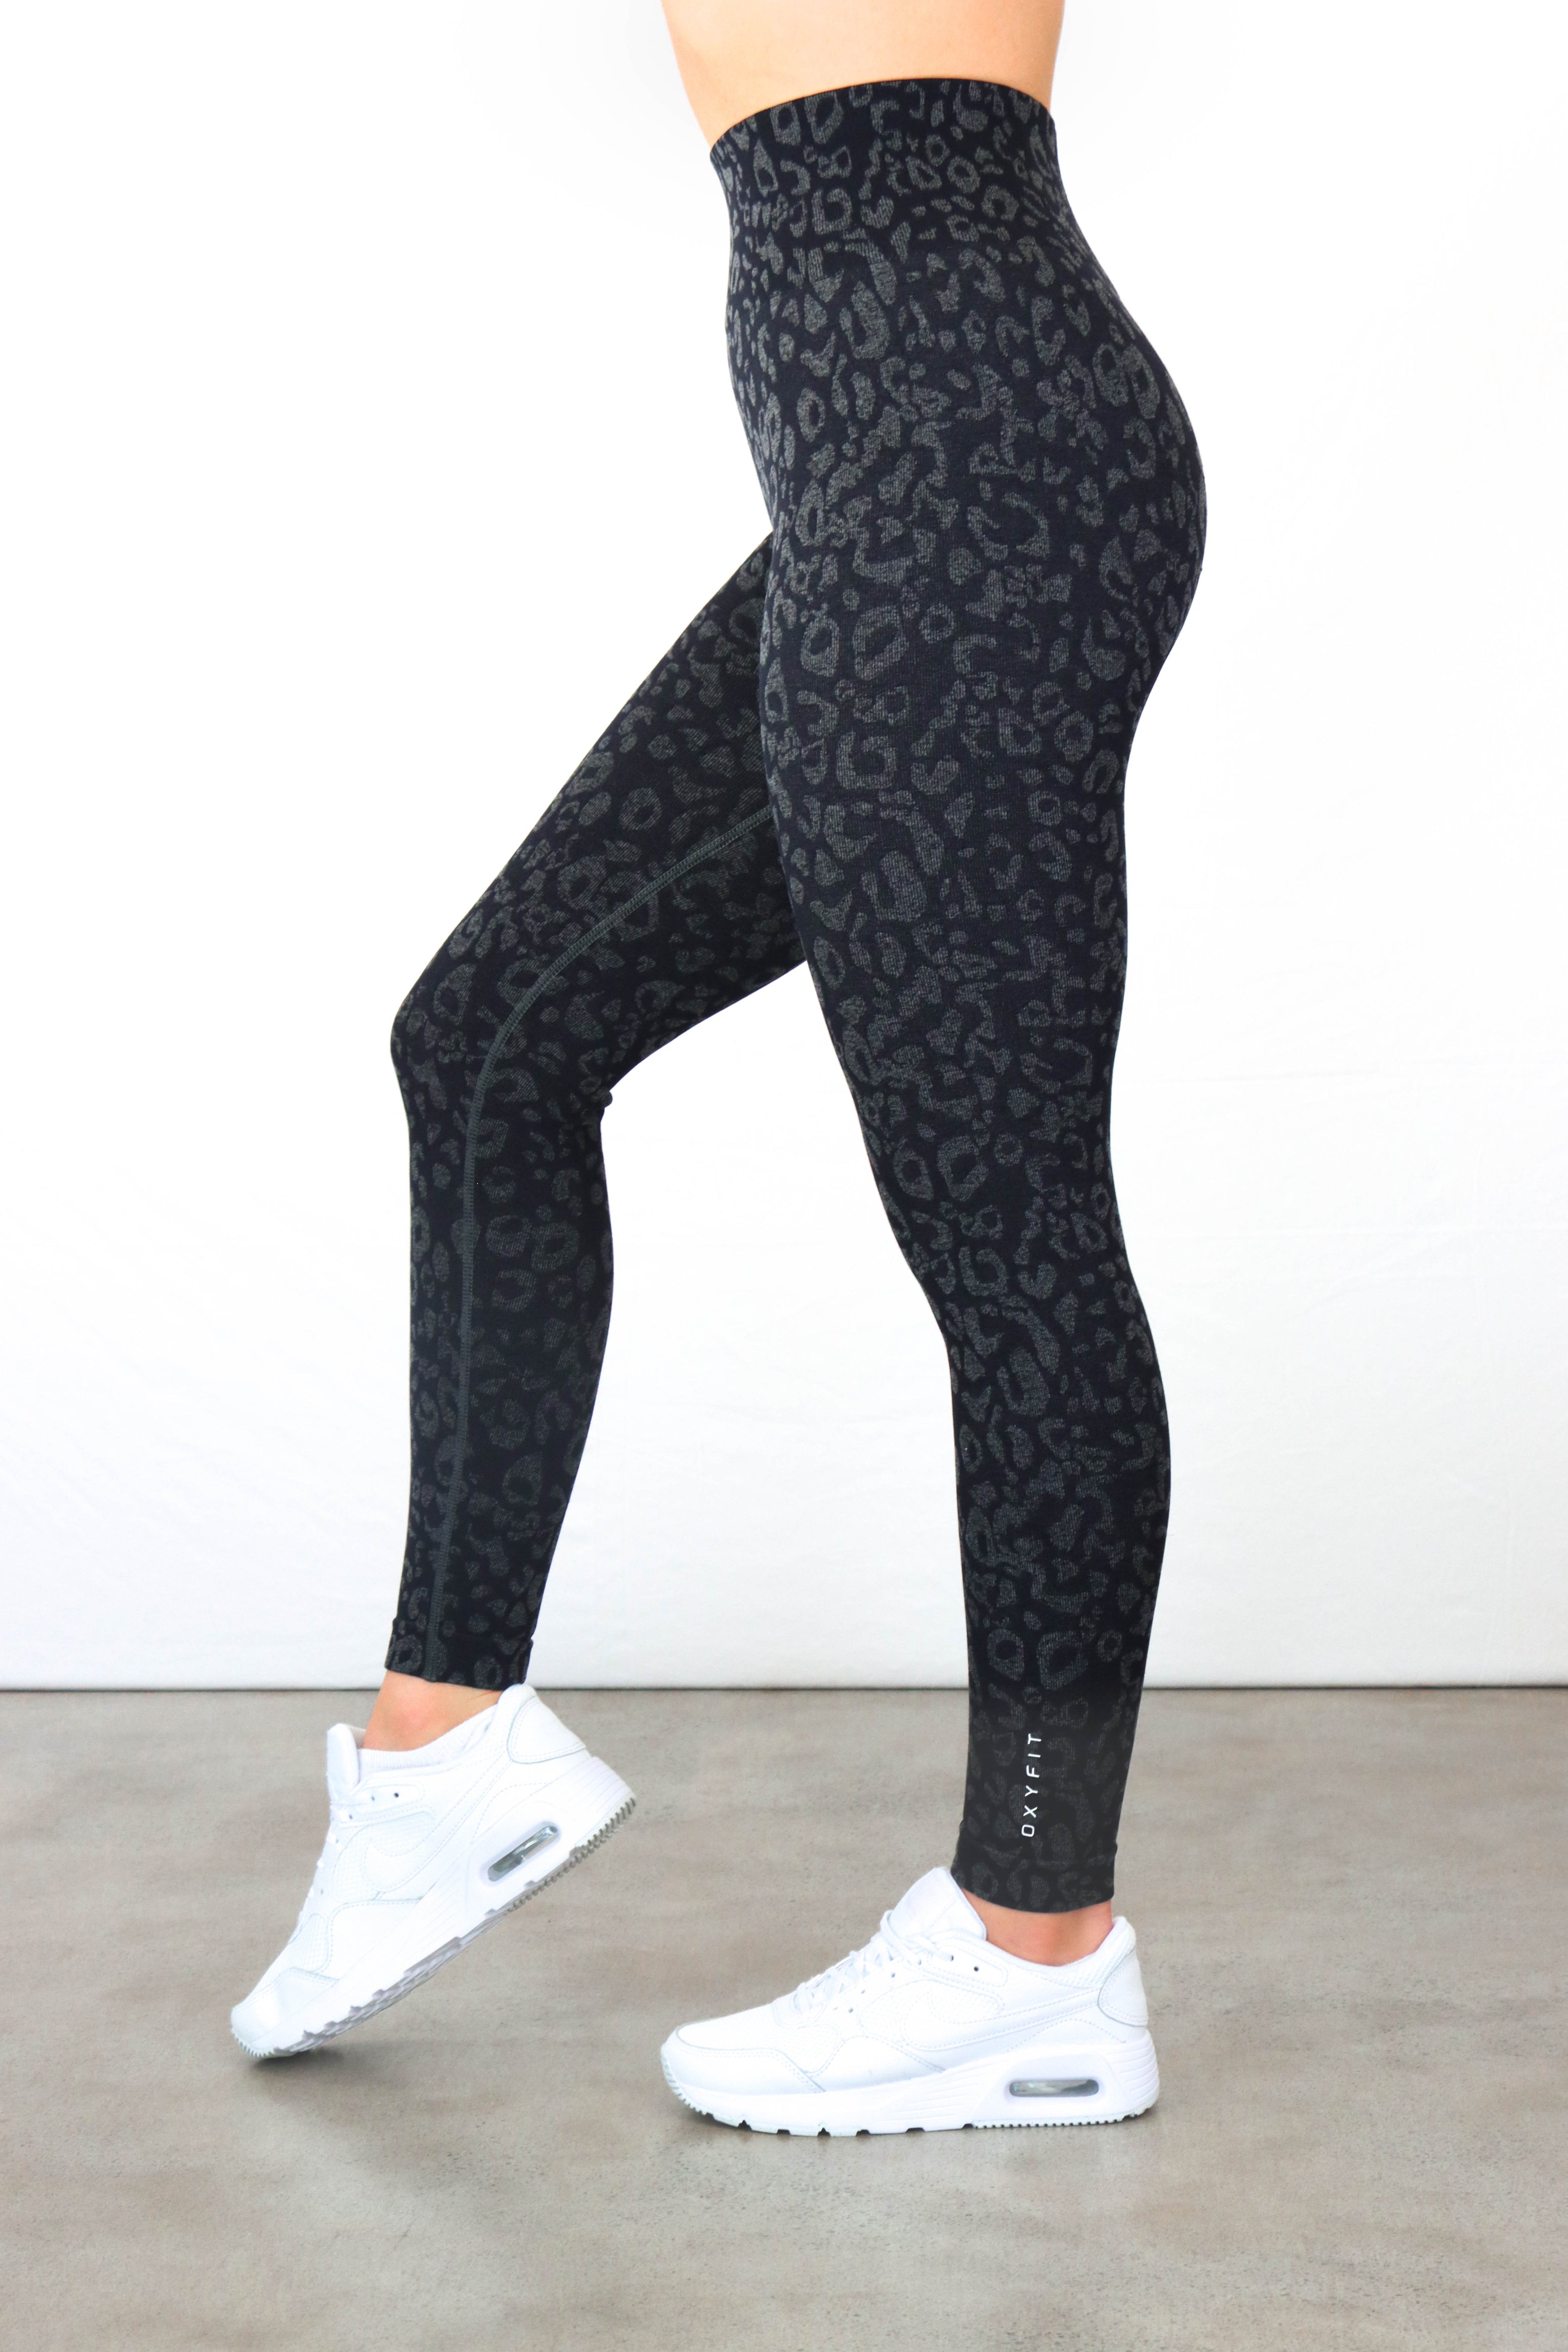  FITTIN Leopard Printed Yoga Leggings for Women with